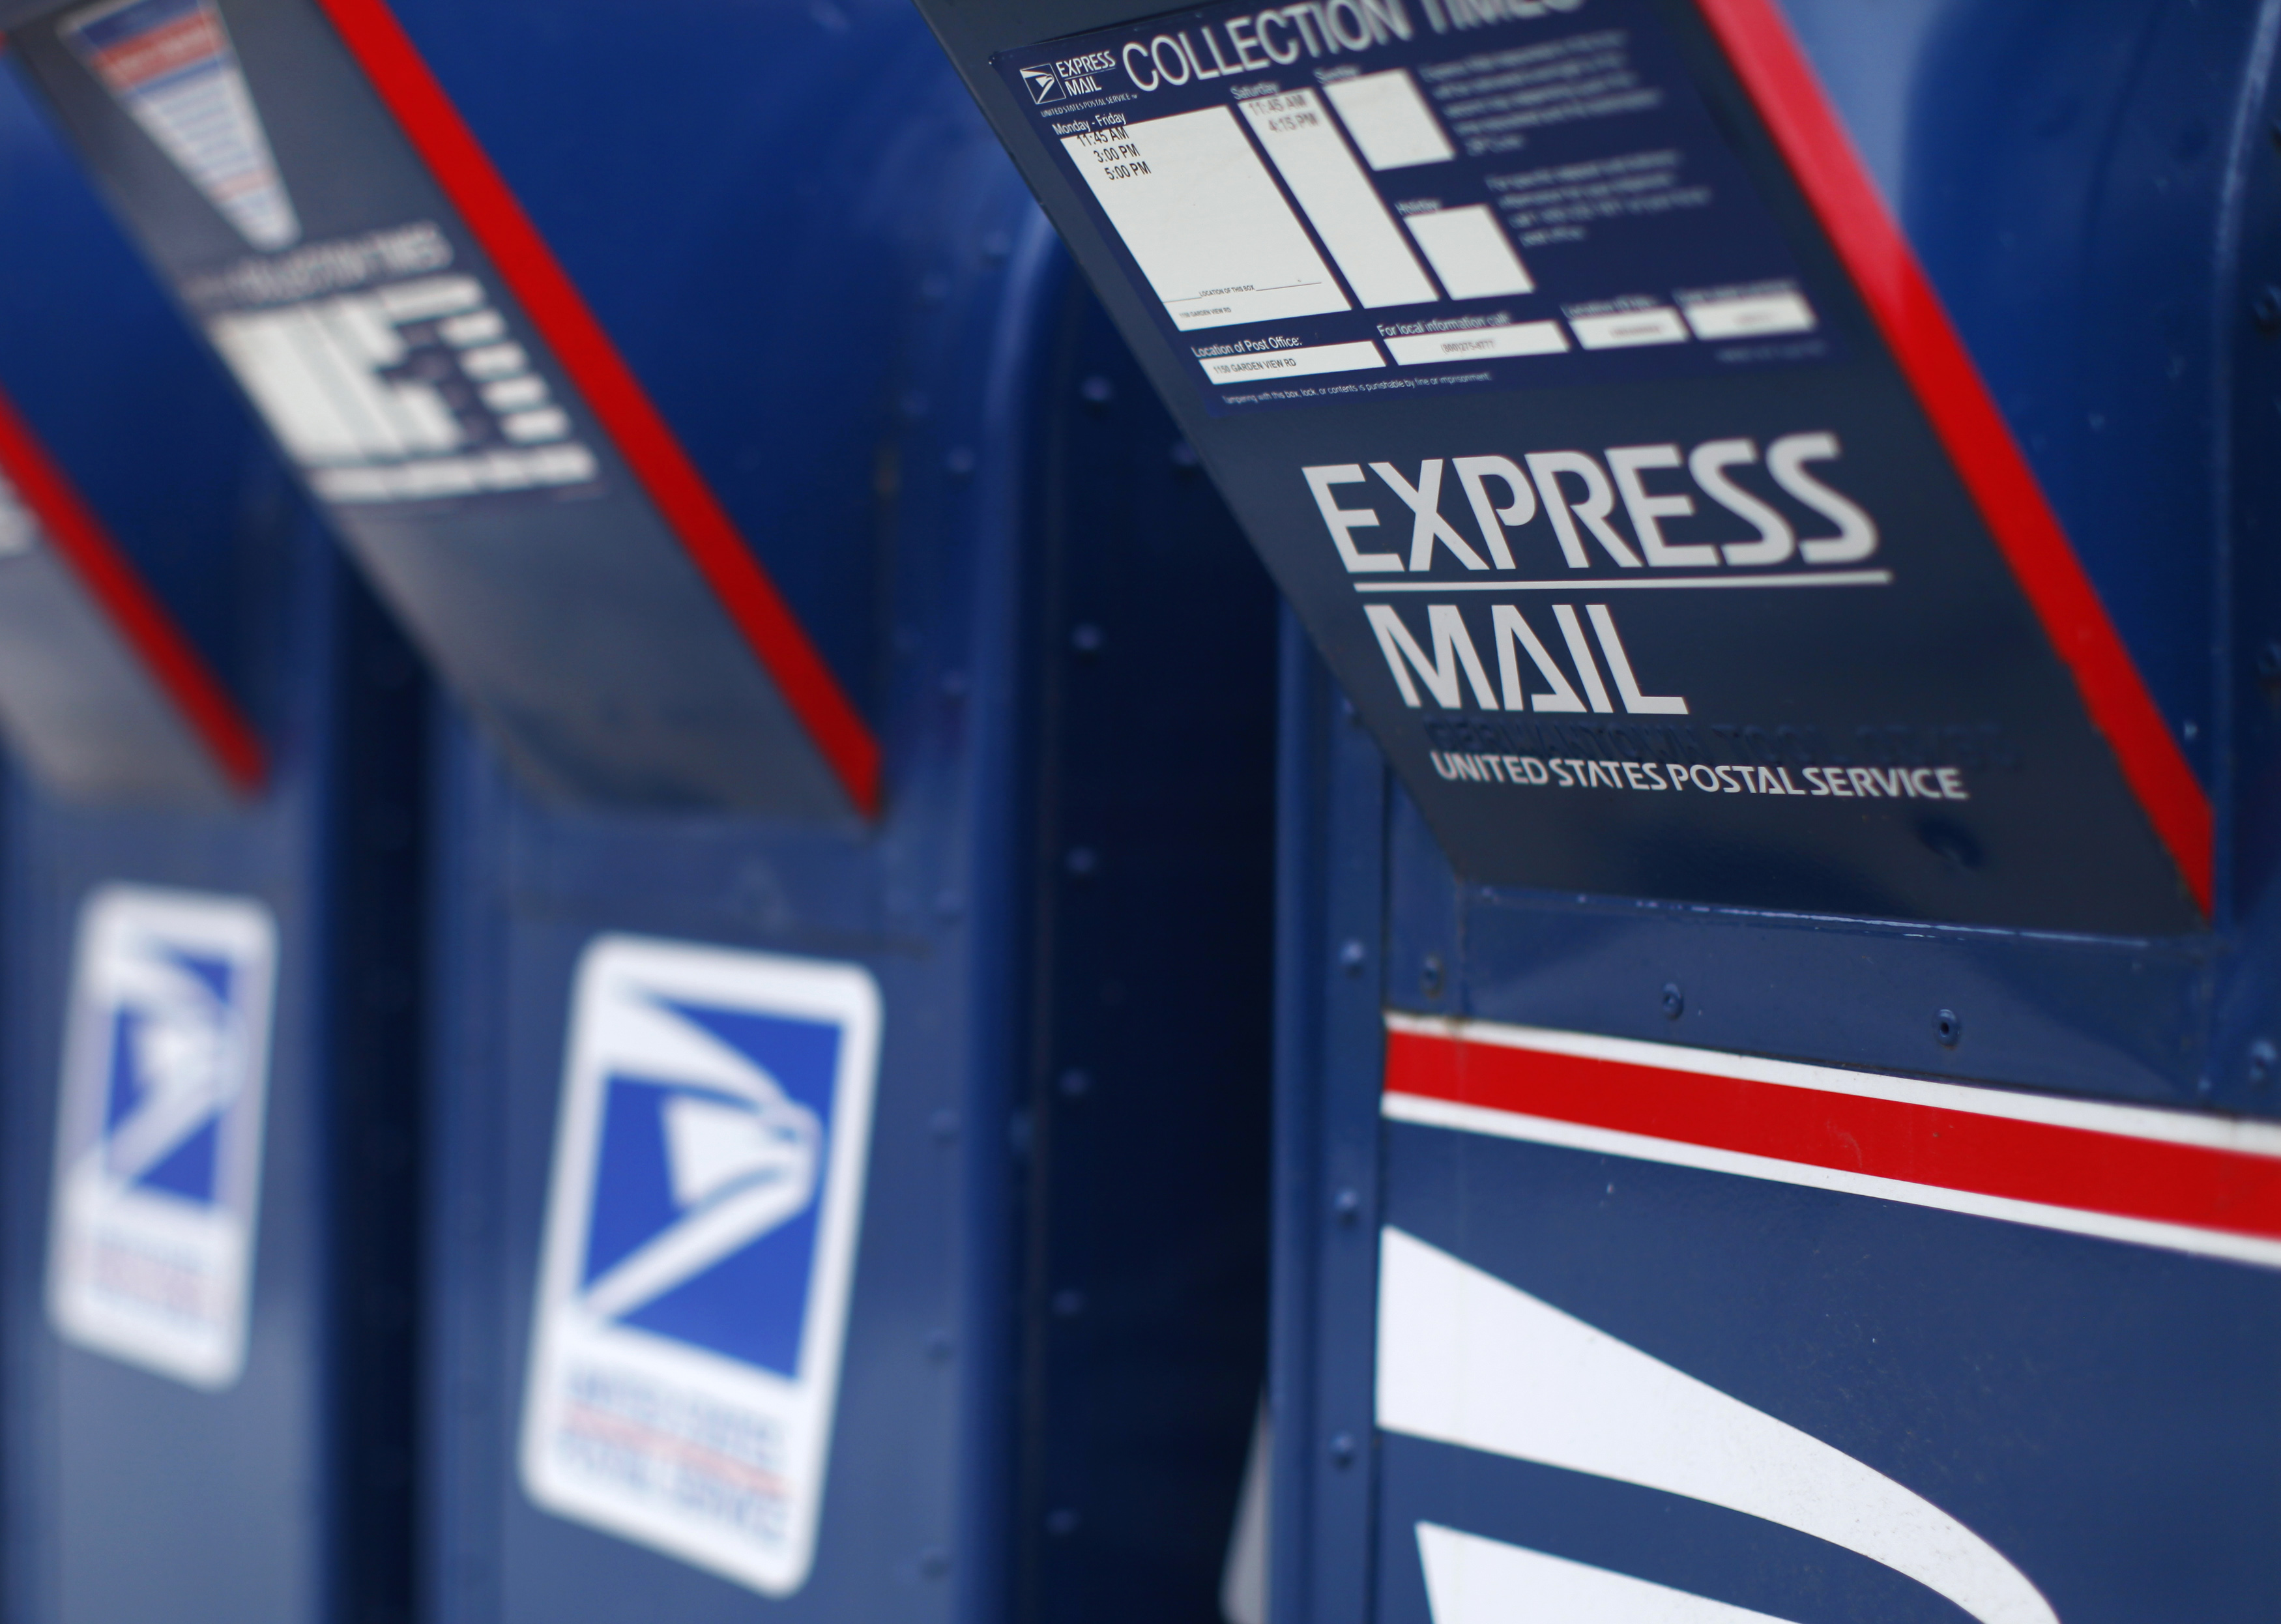 A pilot project to test the delivery of mail between the U.S. and Cuba is set to launch in a few weeks.